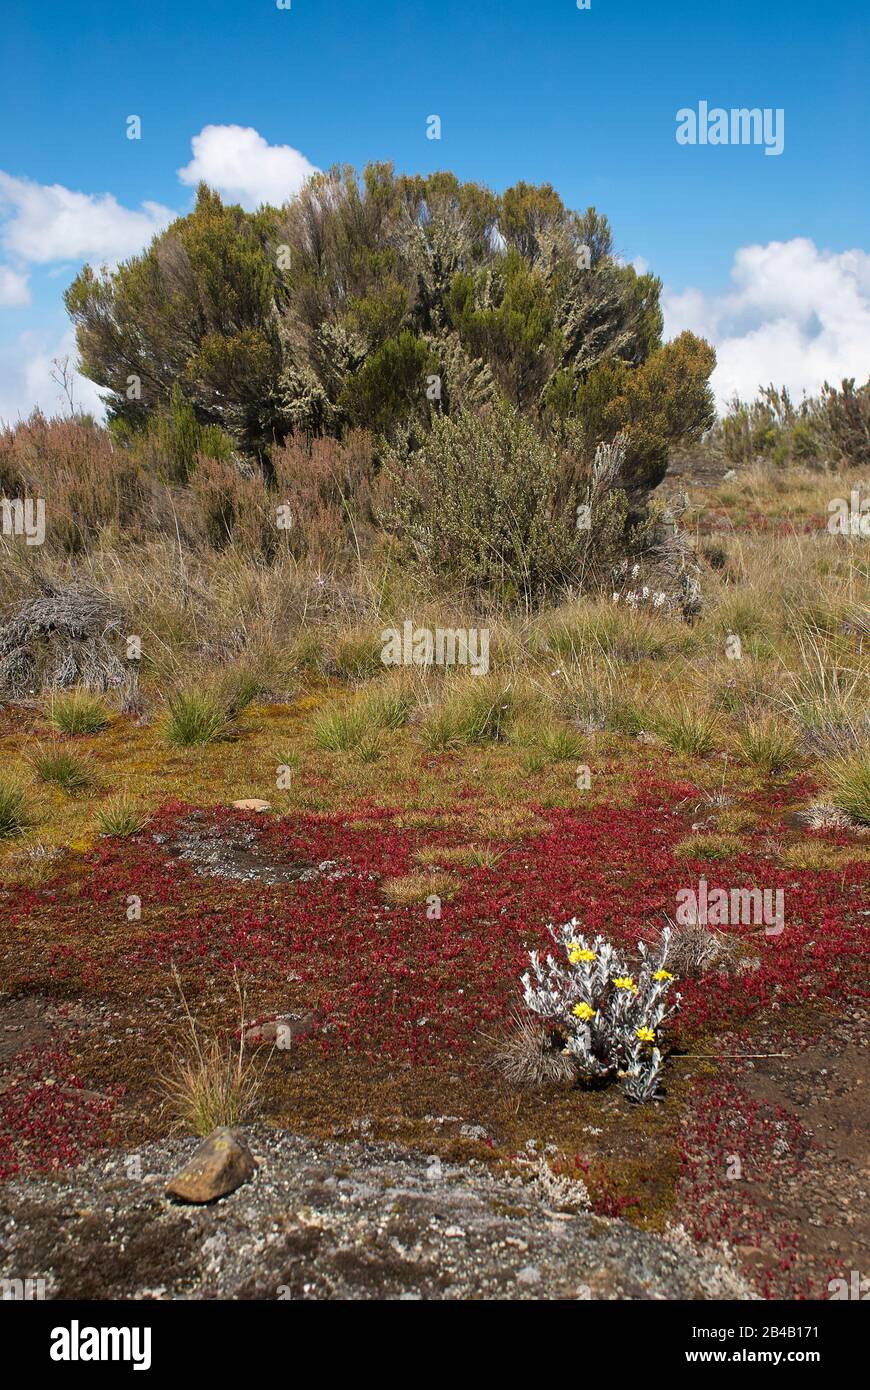 Red flowering moss and a giant heather plant on Mt. Kilimanjaro's Shira plateau, Tanzania Stock Photo